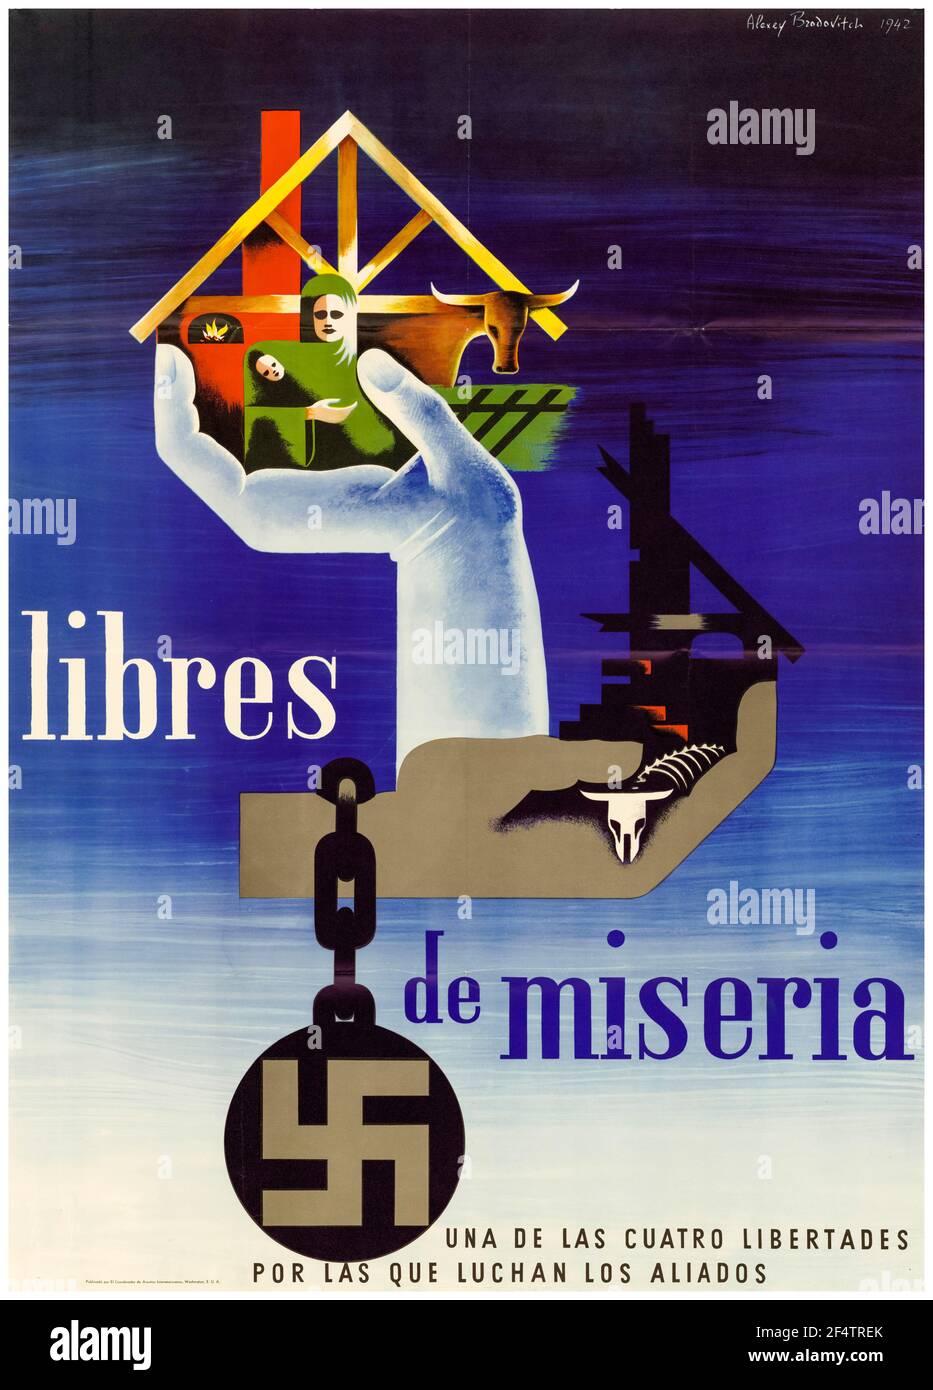 Spanish, WW2, Free from misery: One of the four freedoms allies fight for, poster, 1942-1945 Stock Photo